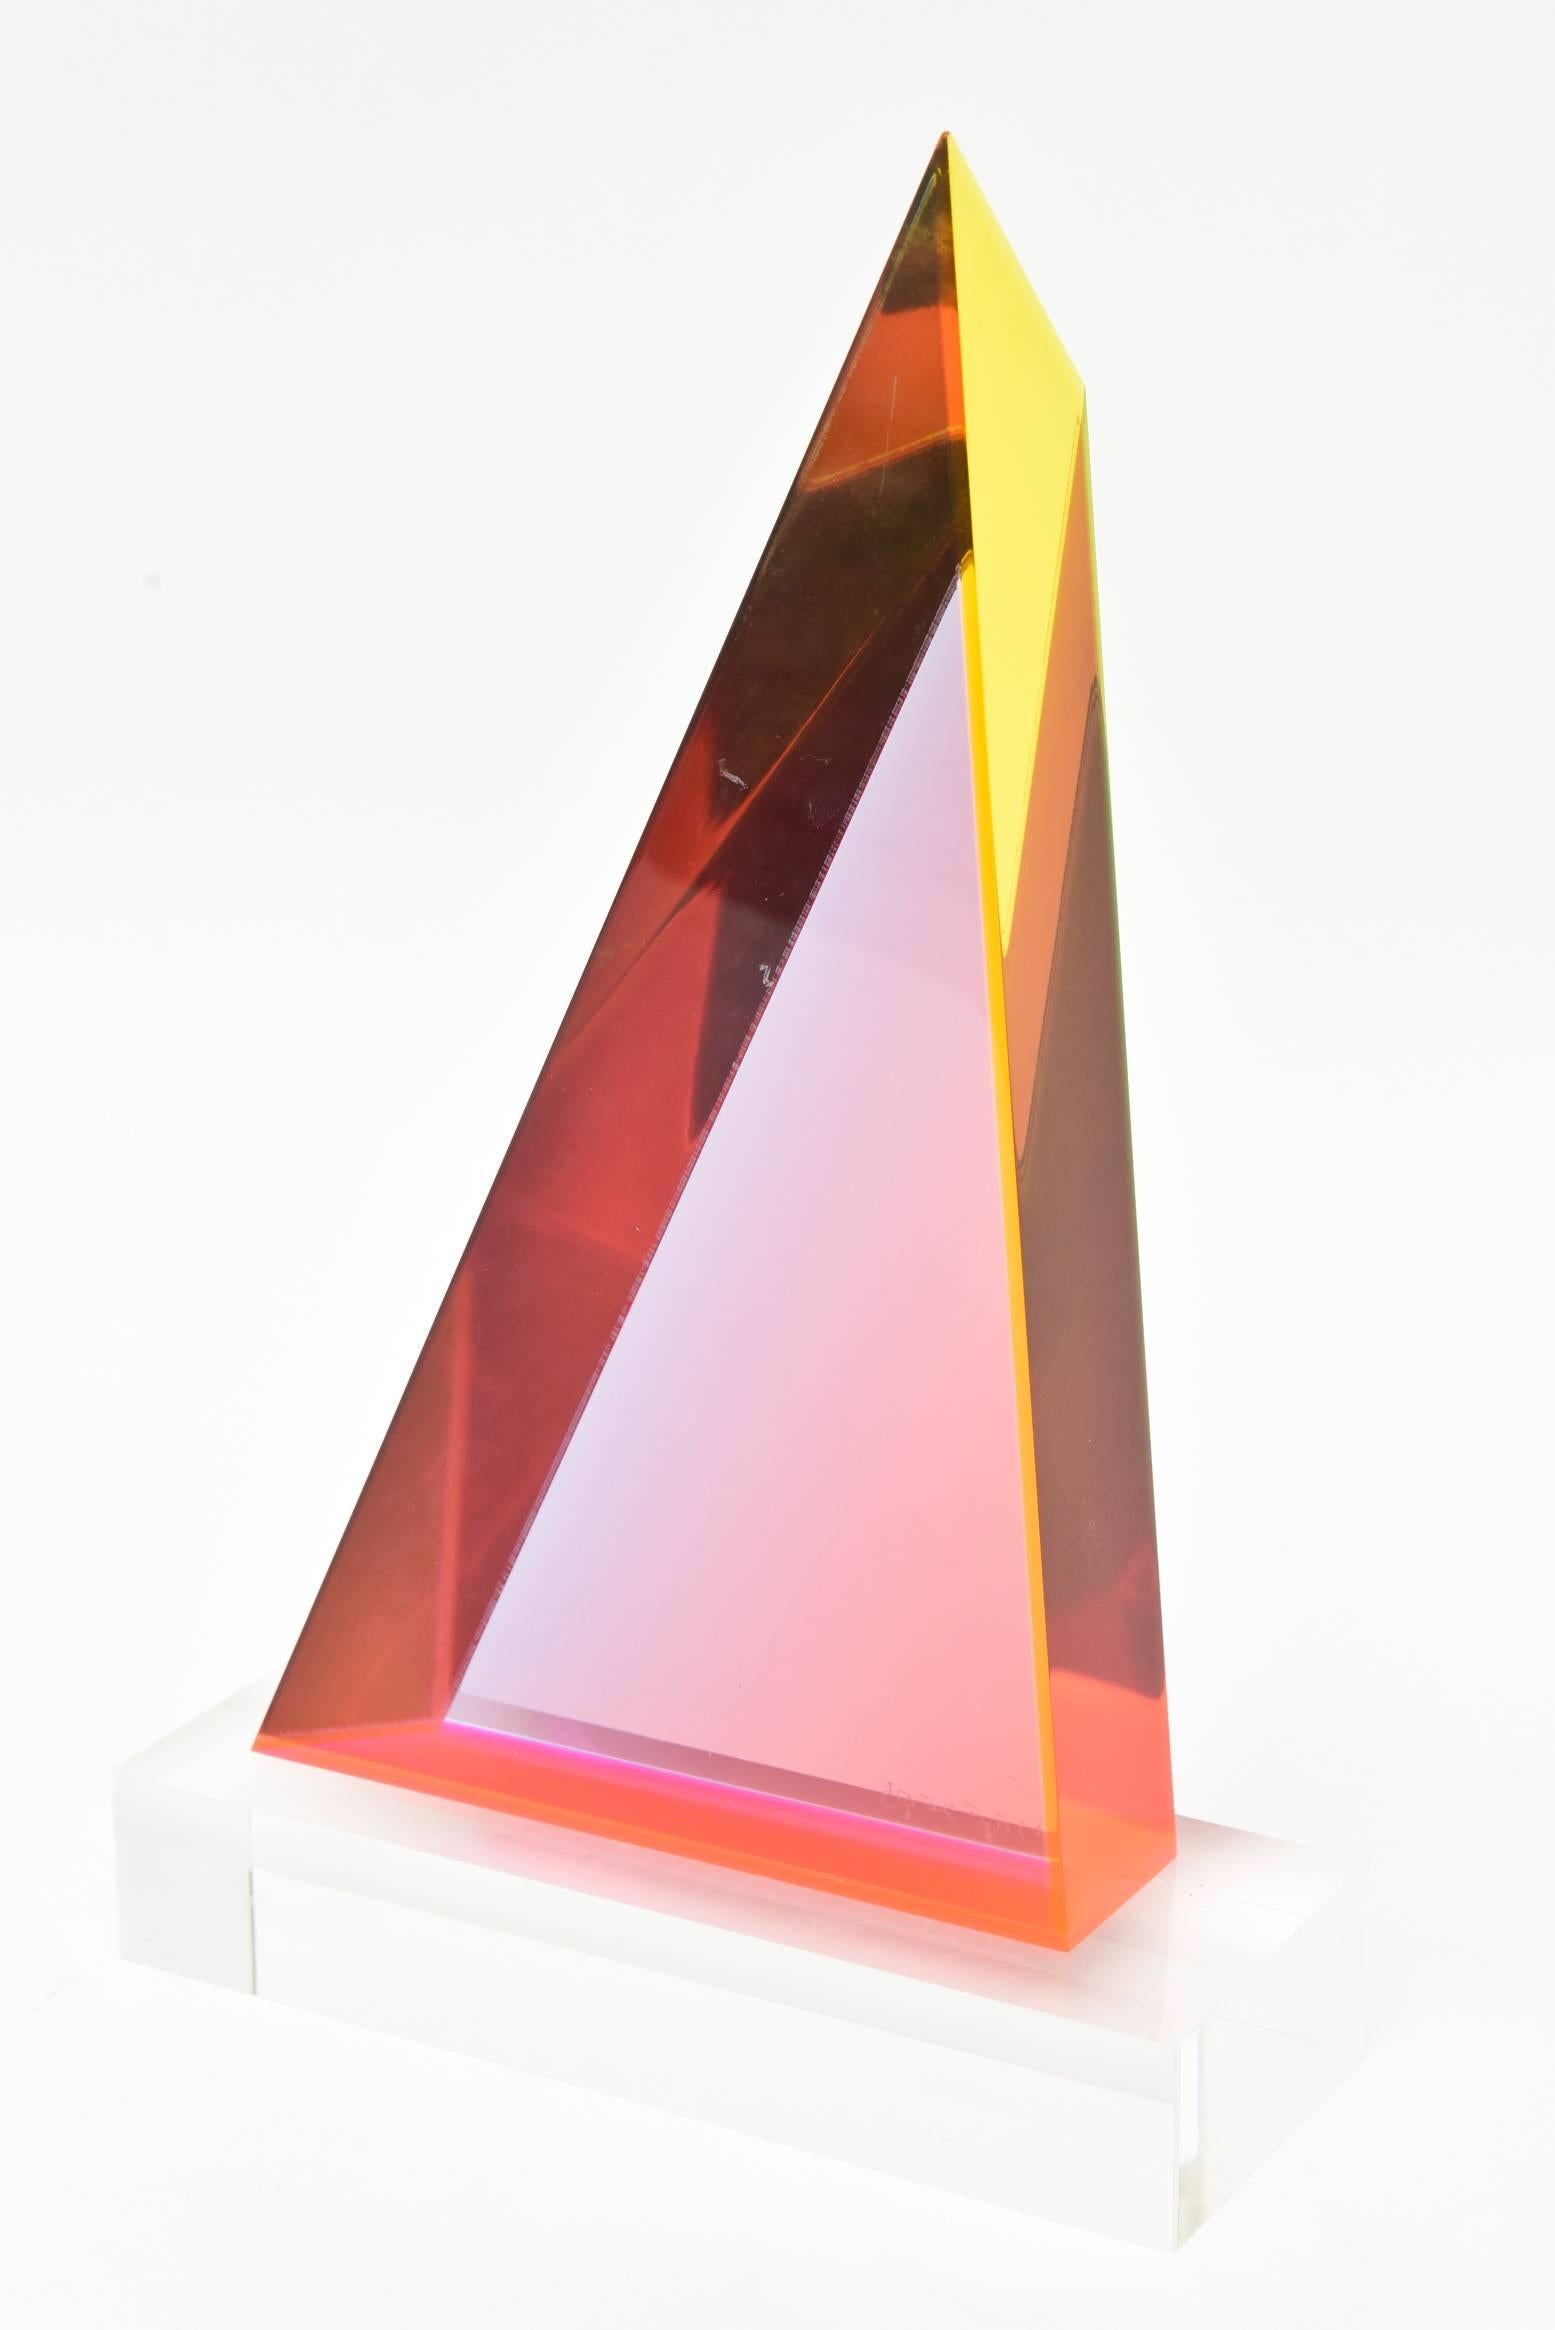 This fantastic, spectacular original and one of a kind Vasa Melich triangular geometric laminated Lucite sculpture varies from angle to angle and light to light. It is signed and dated 2005. The Lucite sculpture without the base is 12